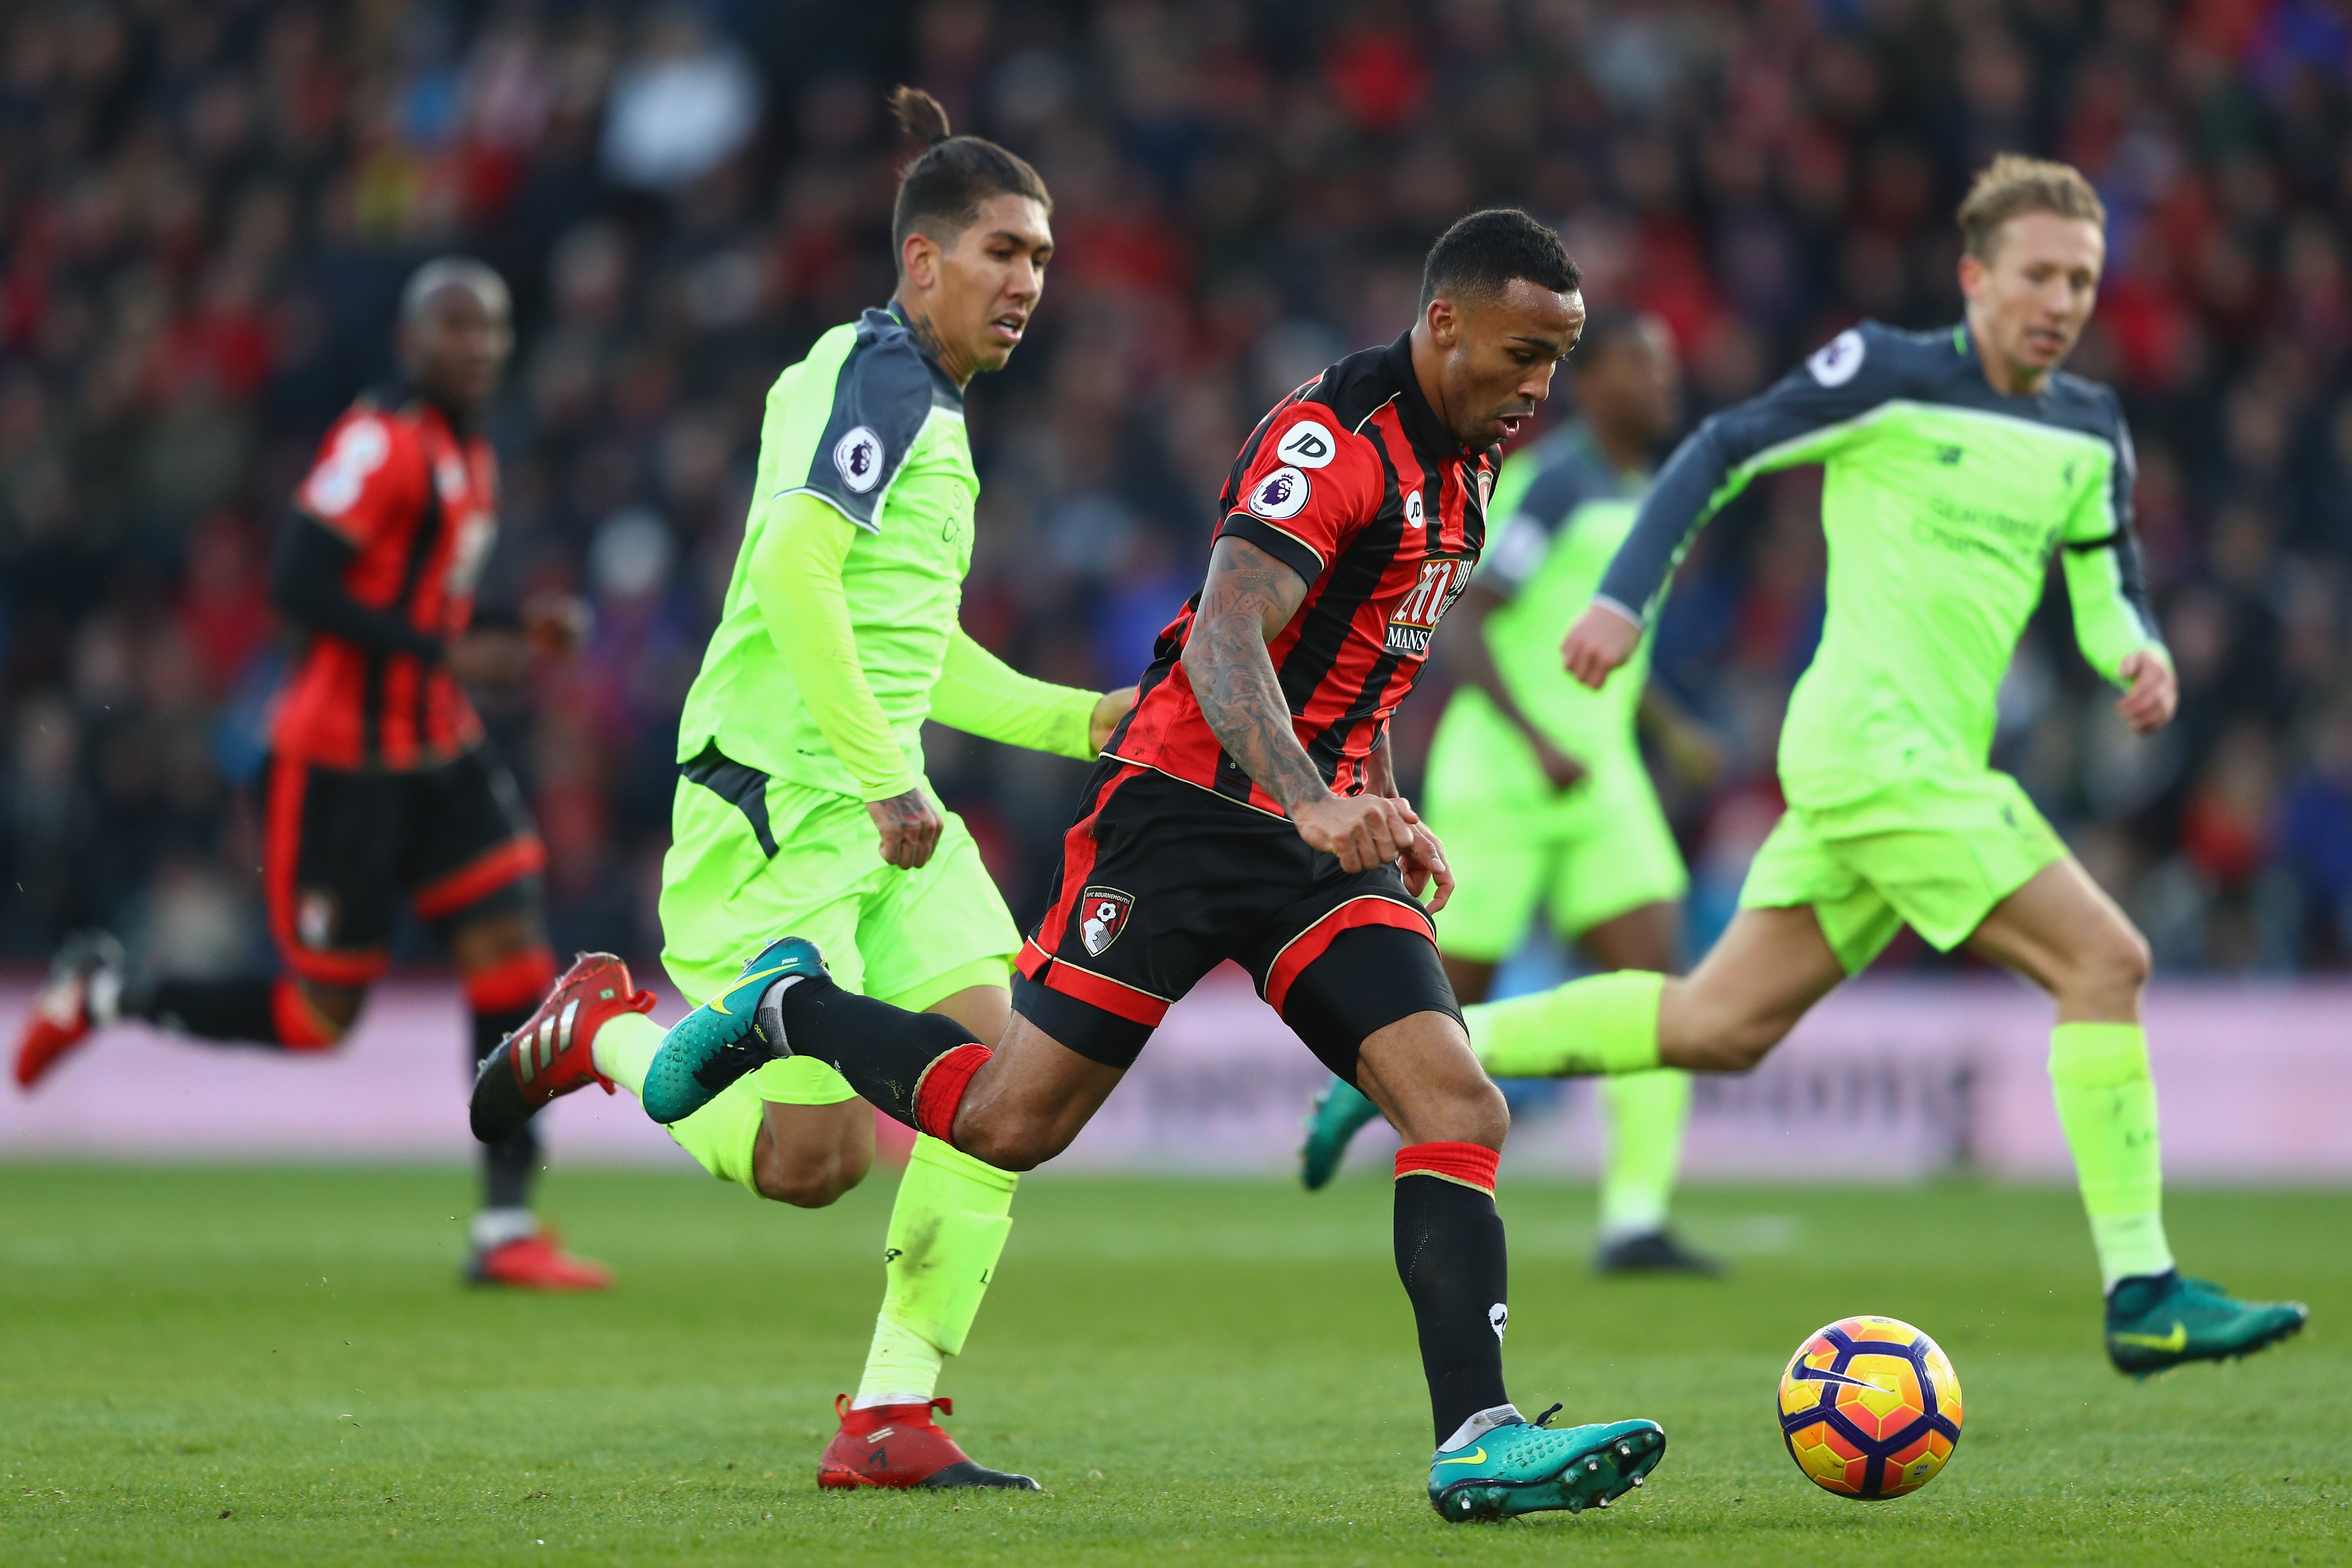 BOURNEMOUTH, ENGLAND - DECEMBER 04:  Callum Wilson of Bournemouth is tracked by Roberto Firmino of Liverpool during the Premier League match between AFC Bournemouth and Liverpool at the Vitality Stadium on December 4, 2016 in Bournemouth, England.  (Photo by Michael Steele/Getty Images)